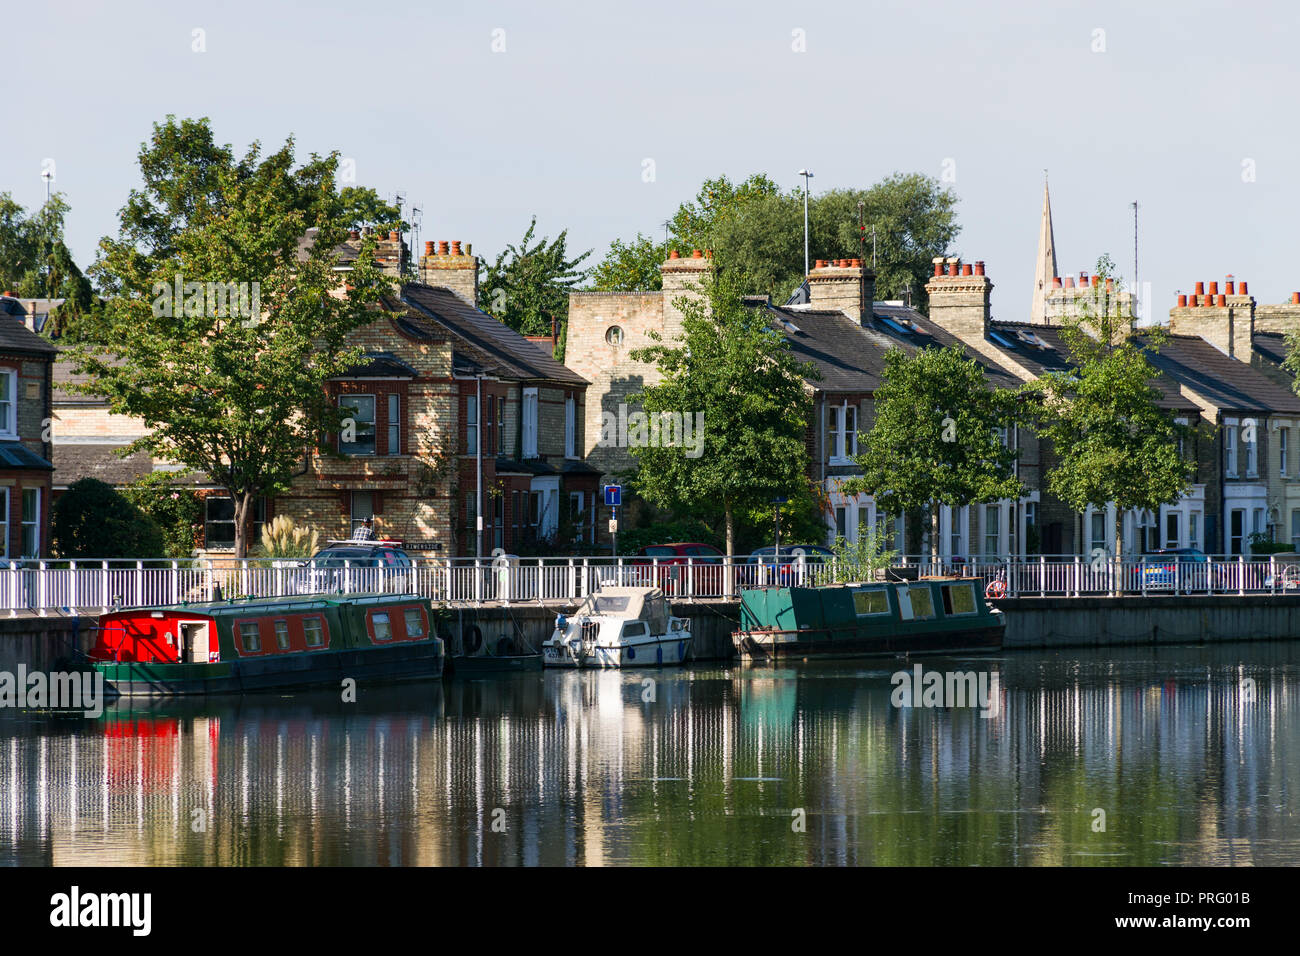 A row of houses situated by the River Cam with narrowboats moored on the river on a sunny Summer day, Cambridge, UK Stock Photo